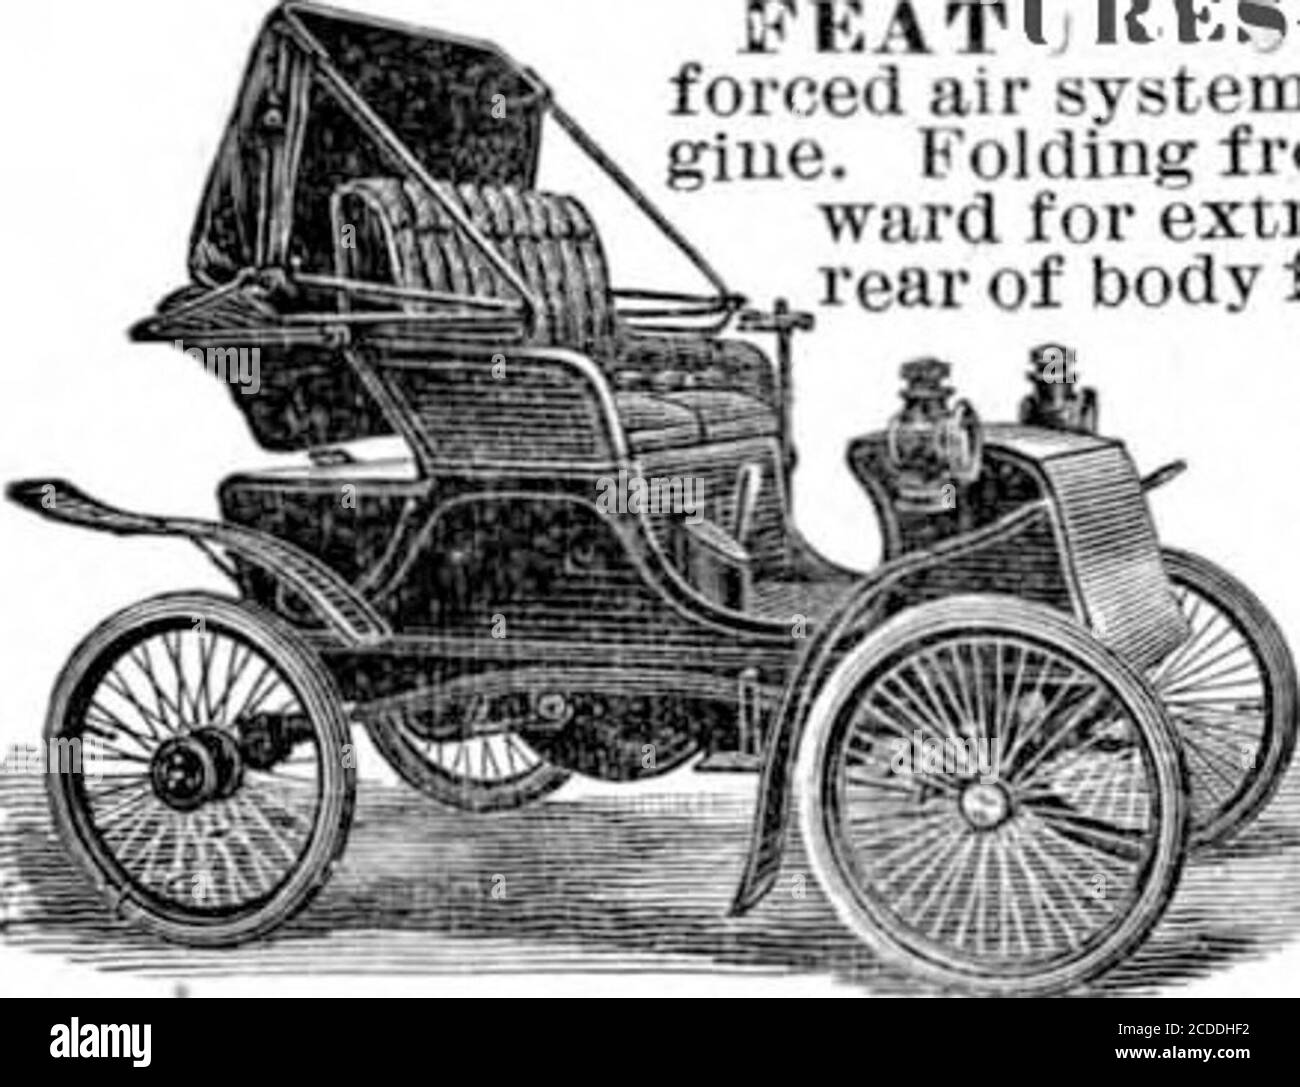 . Scientific American Volume 86 Number 14 (April 1902) . The Waterless Knouobile. A Business, Pleasure nil Touring Car combined, rlJllK?&gt;—Grooved pins and,ir system for cooling the en-giue. Folding front seat, facing for-ward for extra passengers Kntirefor carrying purposesTwo hundred mileson one supply ofgasolene. Very sate,due to its simplecontrol, two footbrakes and one dou-ble acting handbrake. ExtremelyOSS? riding, due toits long flexible sidesprings with swiv-eled ends. A great hill climber and very speedy, due toits powerful eight horse power engine. An ideal Doc-tors vehicle. Price Stock Photo